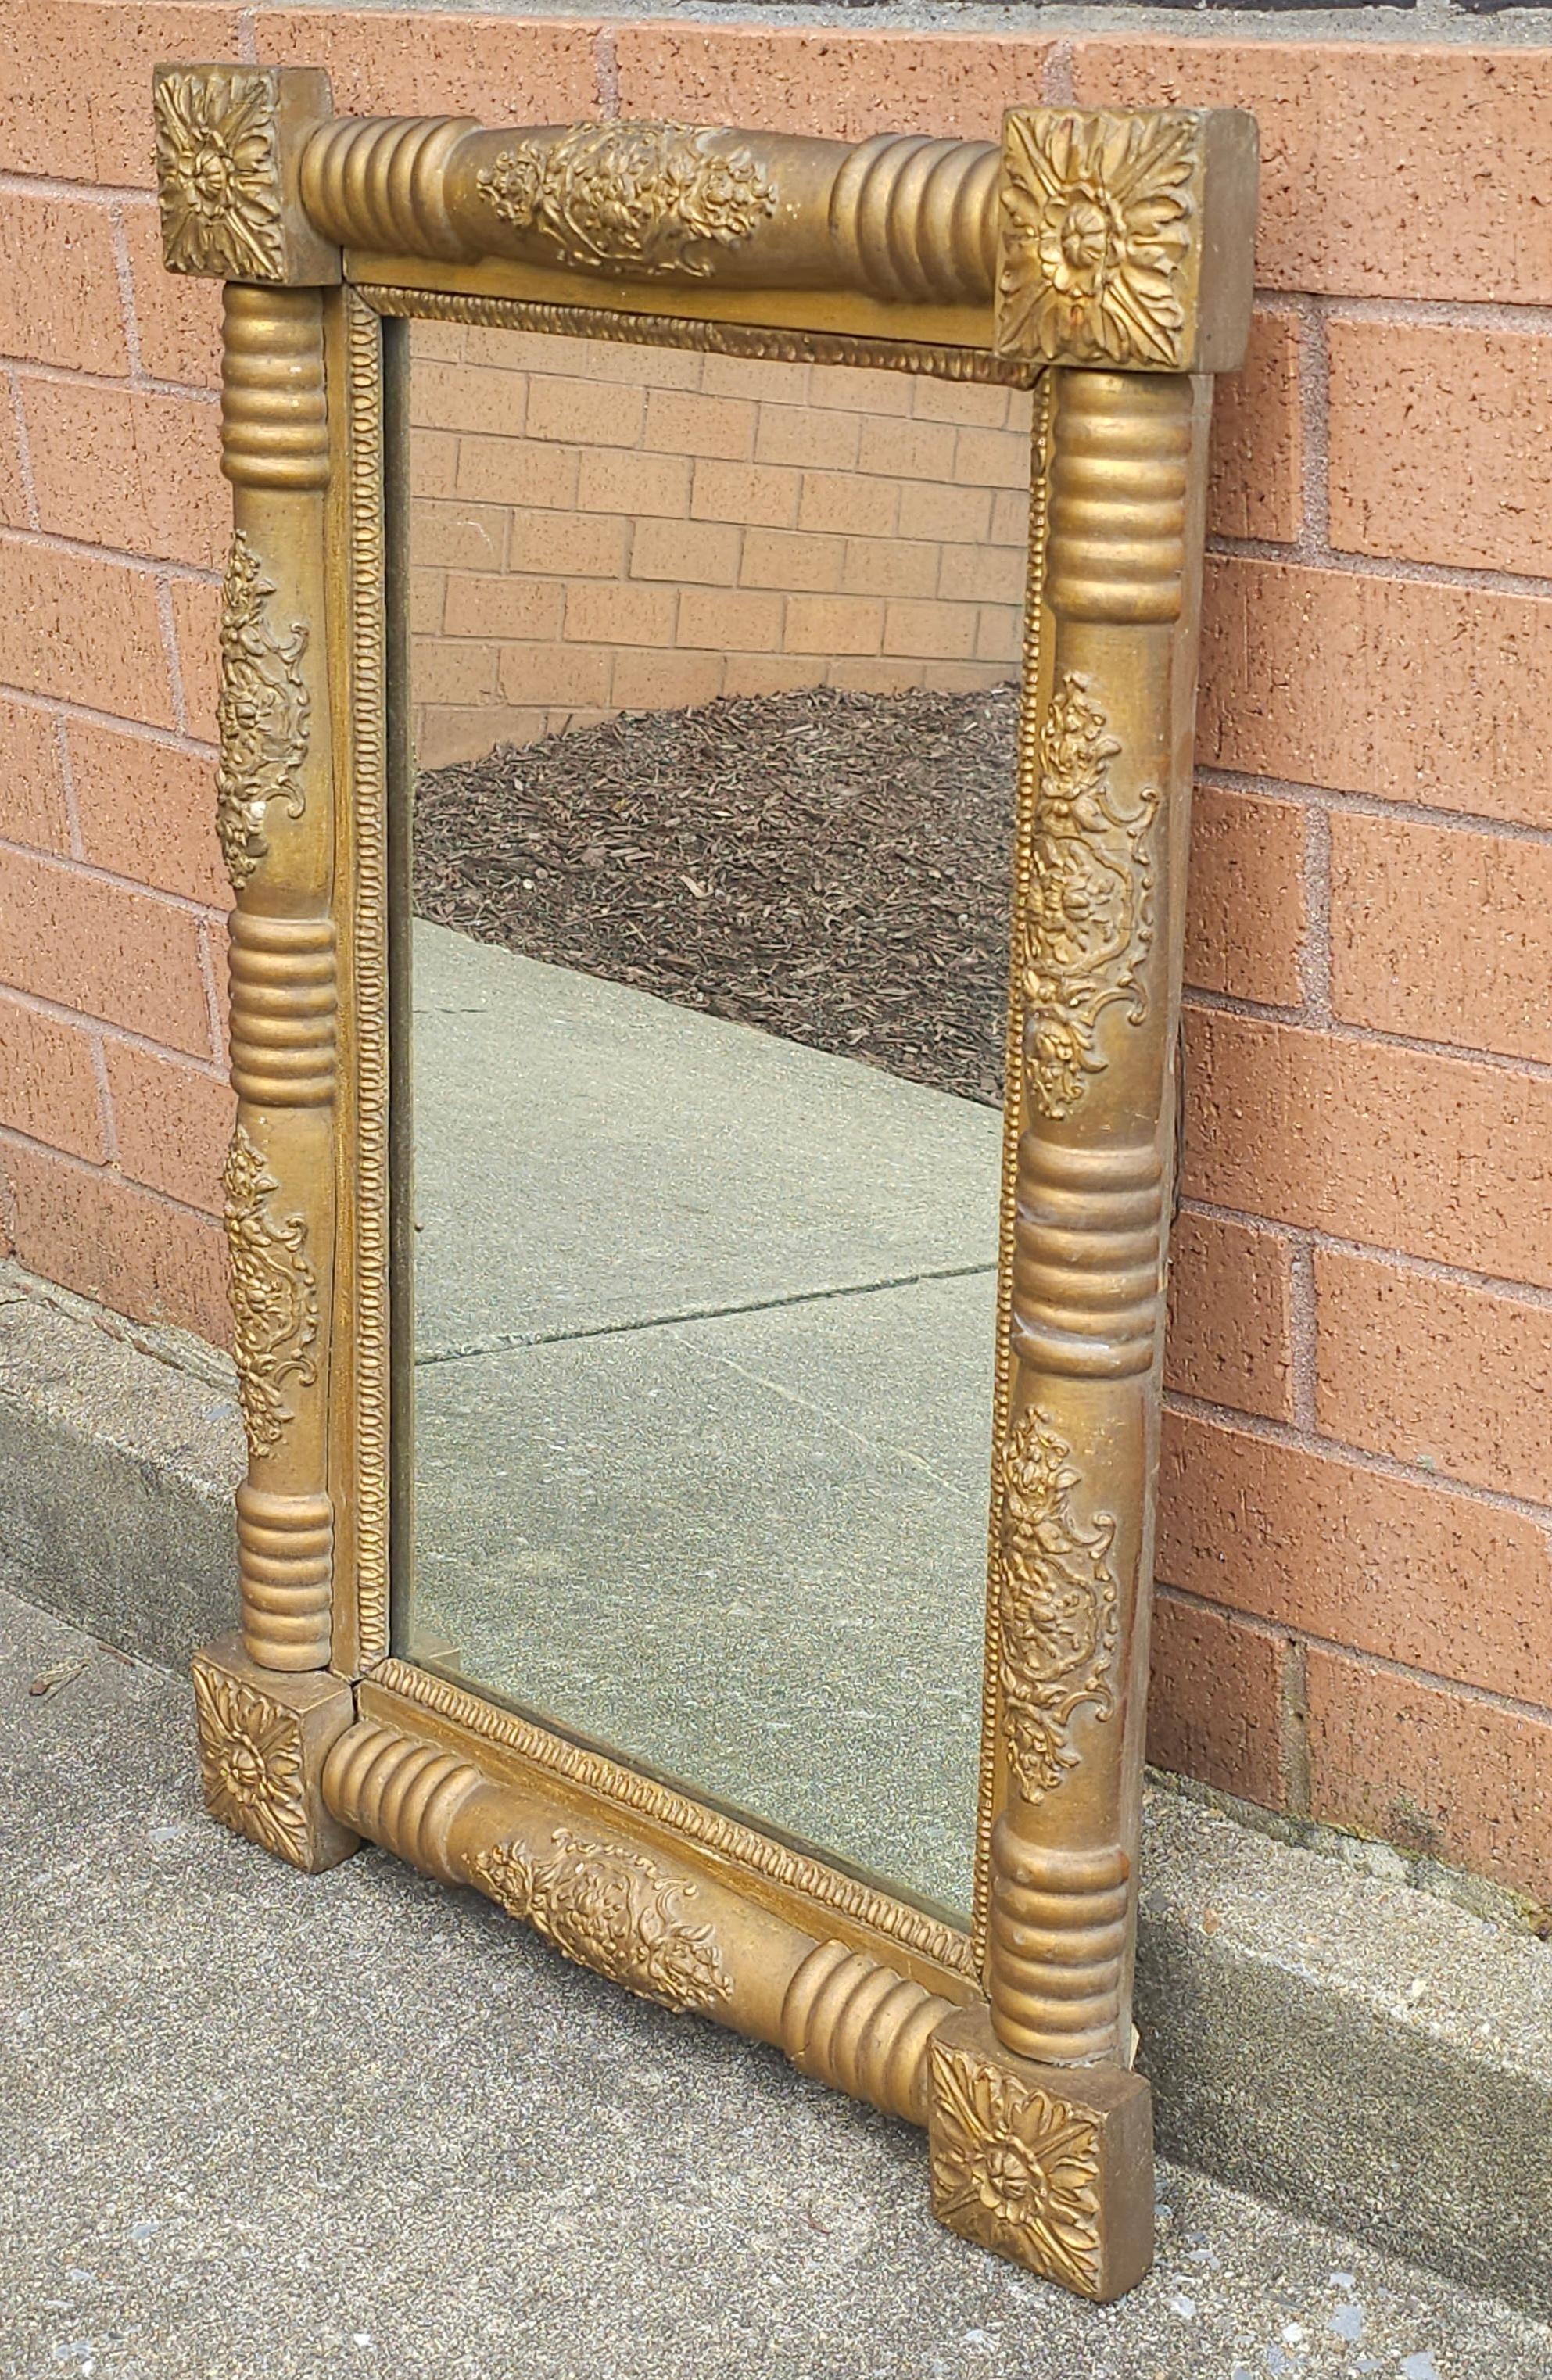 19th Century American Empire Classical Style Giltwood Frame Mirror For Sale 1